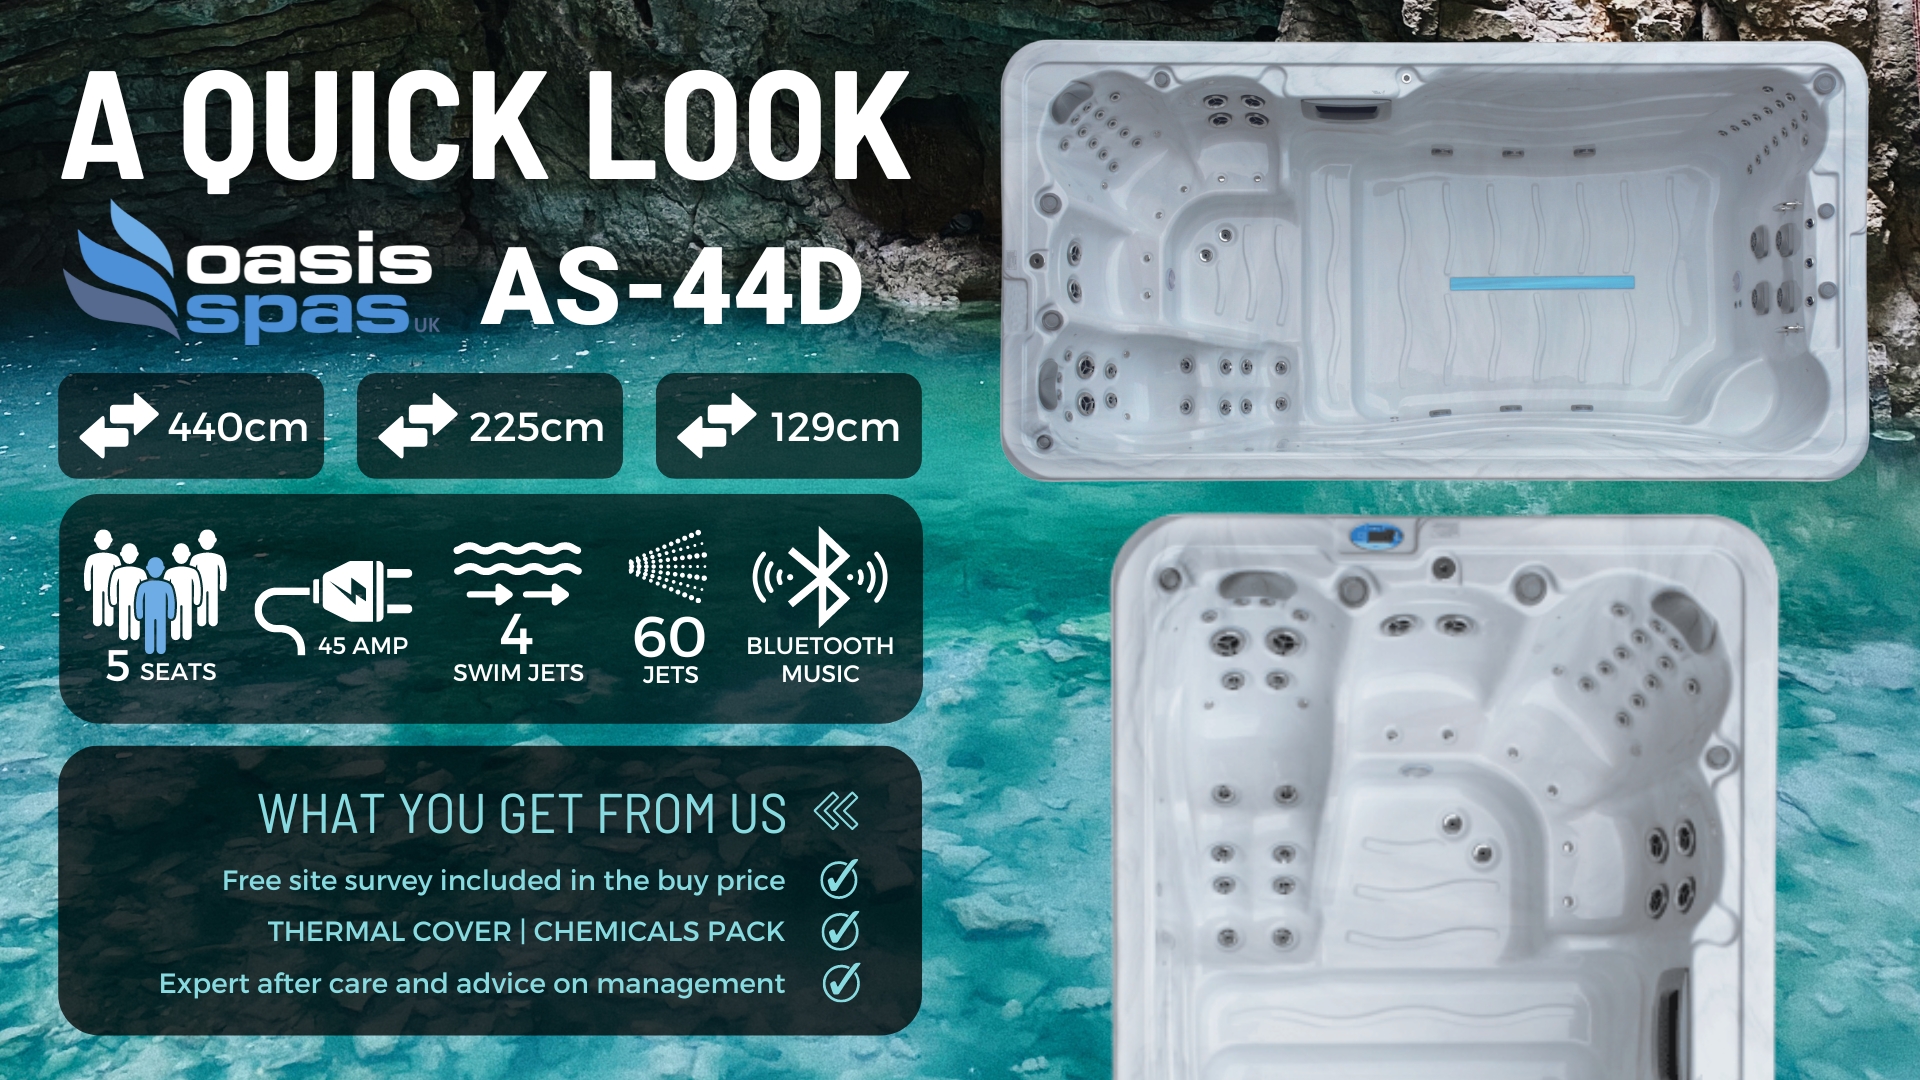 Oasis AS-44D at a glance Specs | A6 Hot Tubs